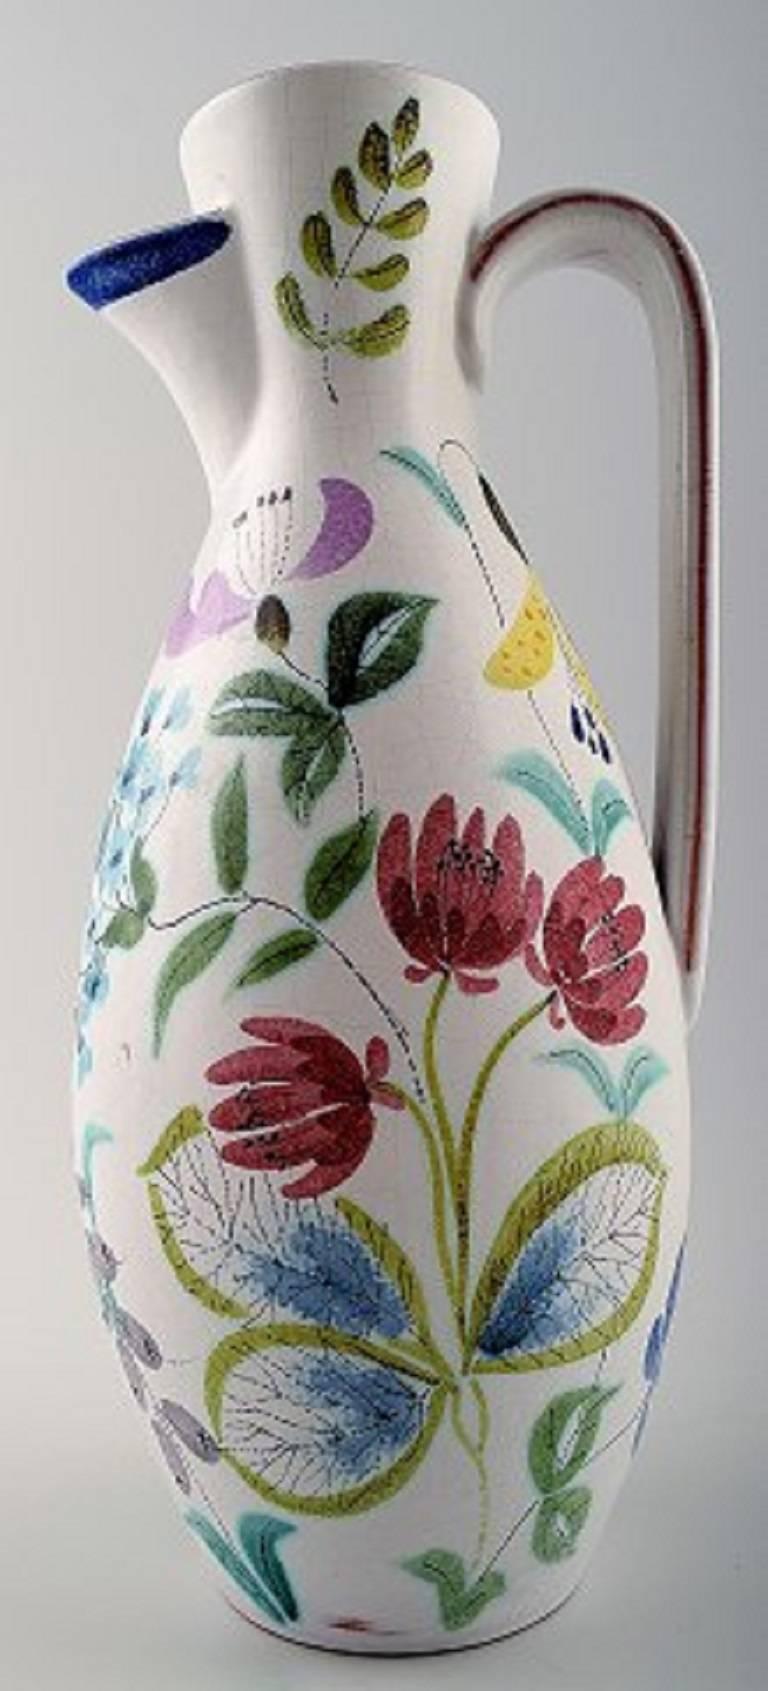 Stig Lindberg for Gustavsberg. Earthenware jug, retro 1940s-1950s.

With colorful hand-painted decoration. 

Signed.

In good condition. Measures: 26 cm.